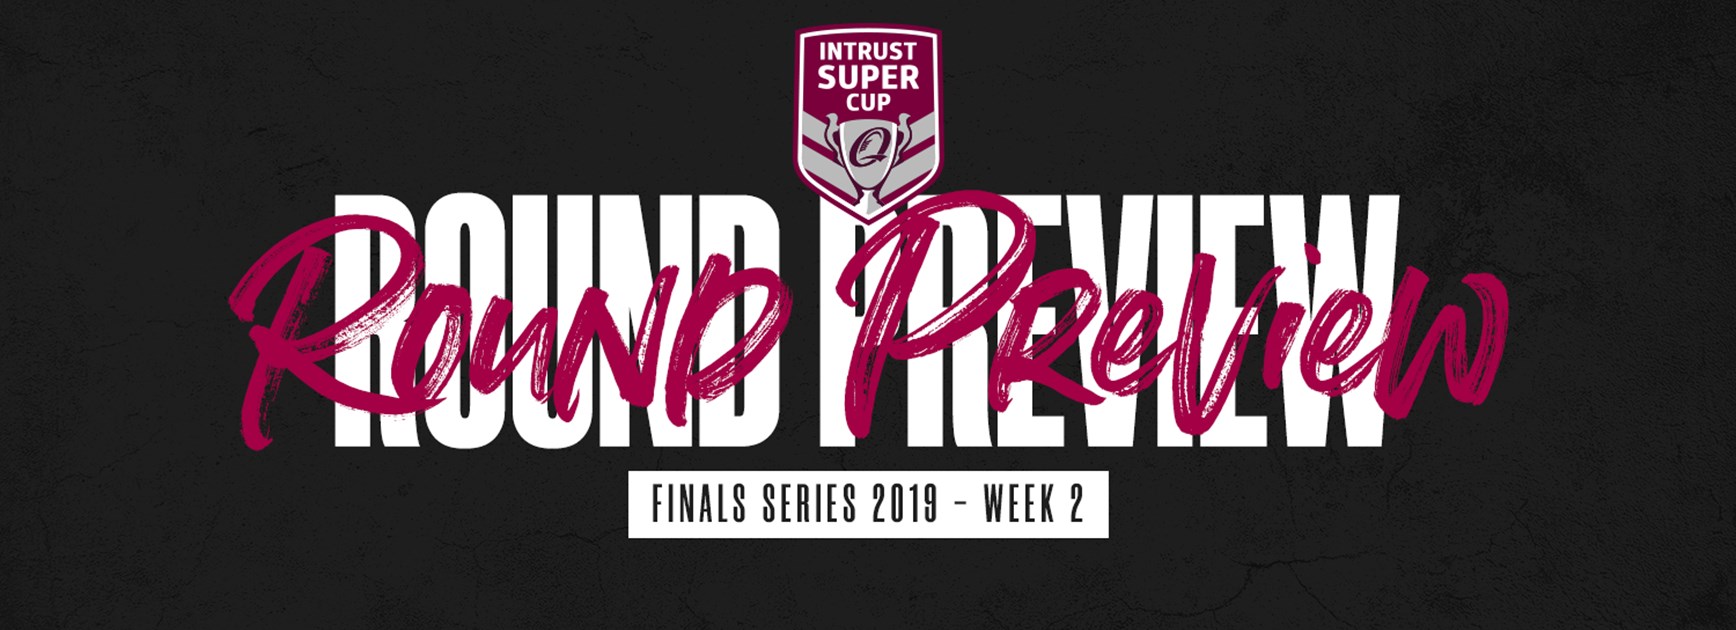 Intrust Super Cup finals week two preview